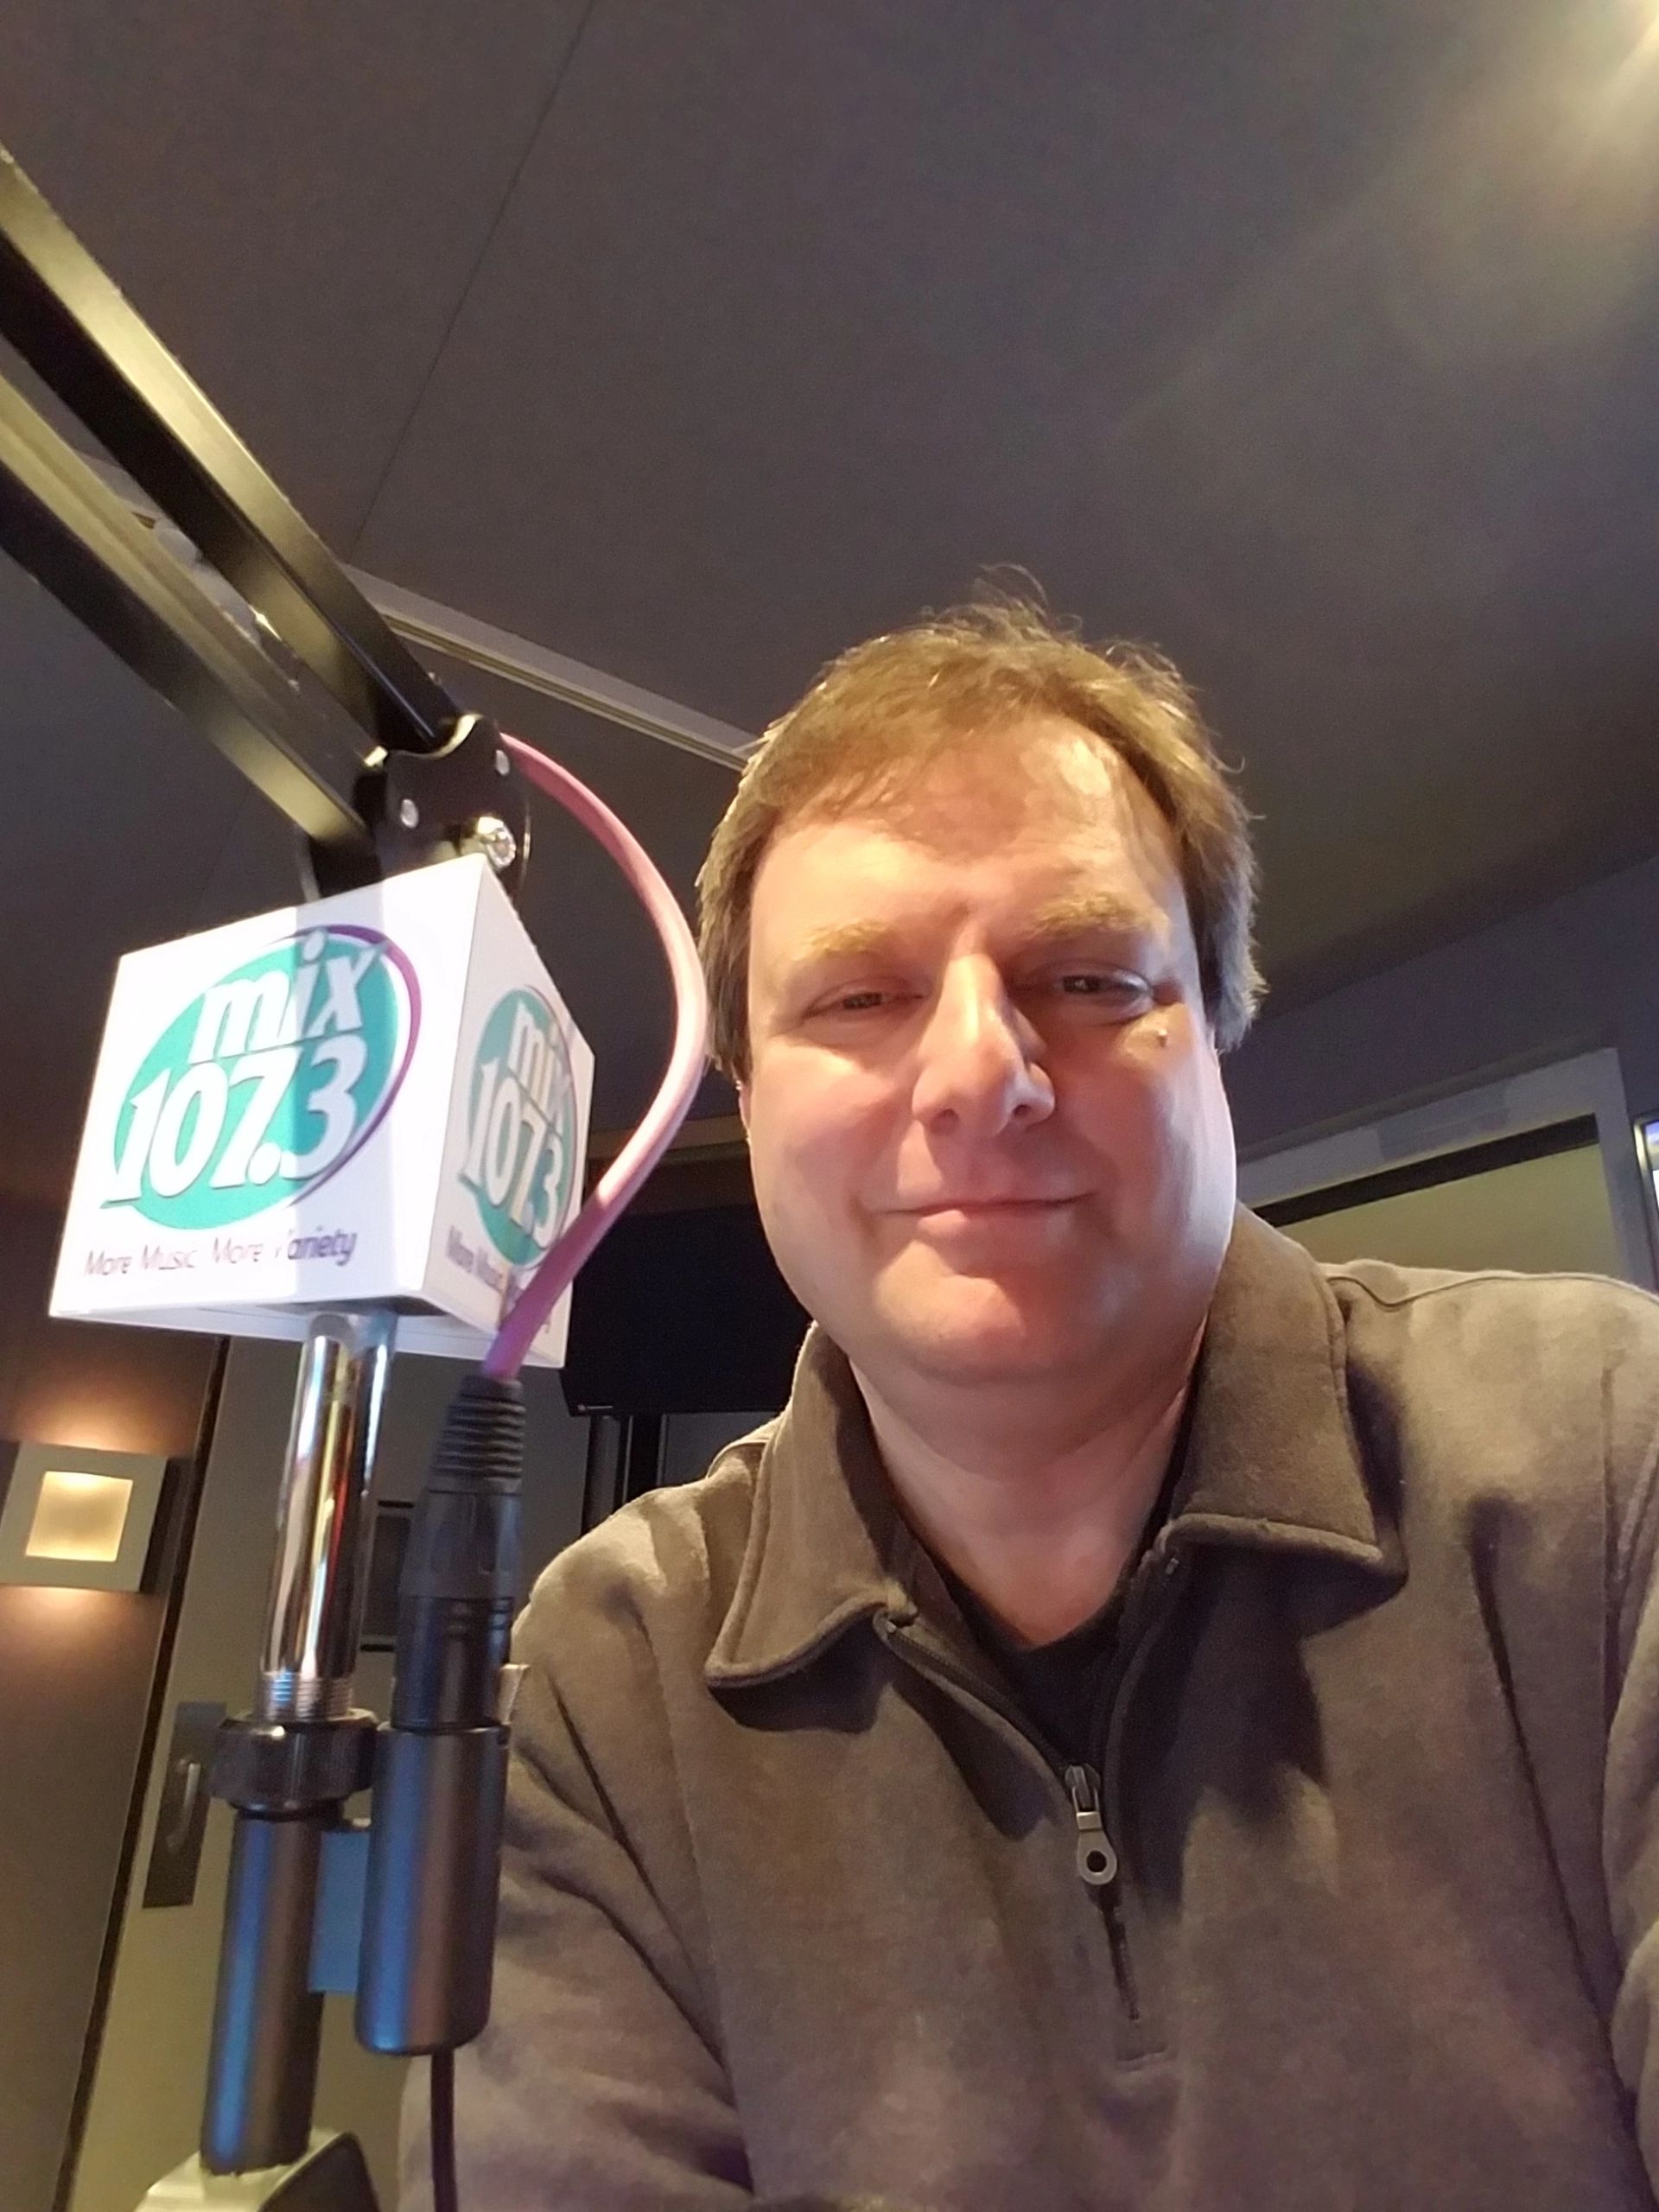 Jeff McKay, Traffic Reporter on Washington, DC's Mix 107.3 from 2014 - 2018